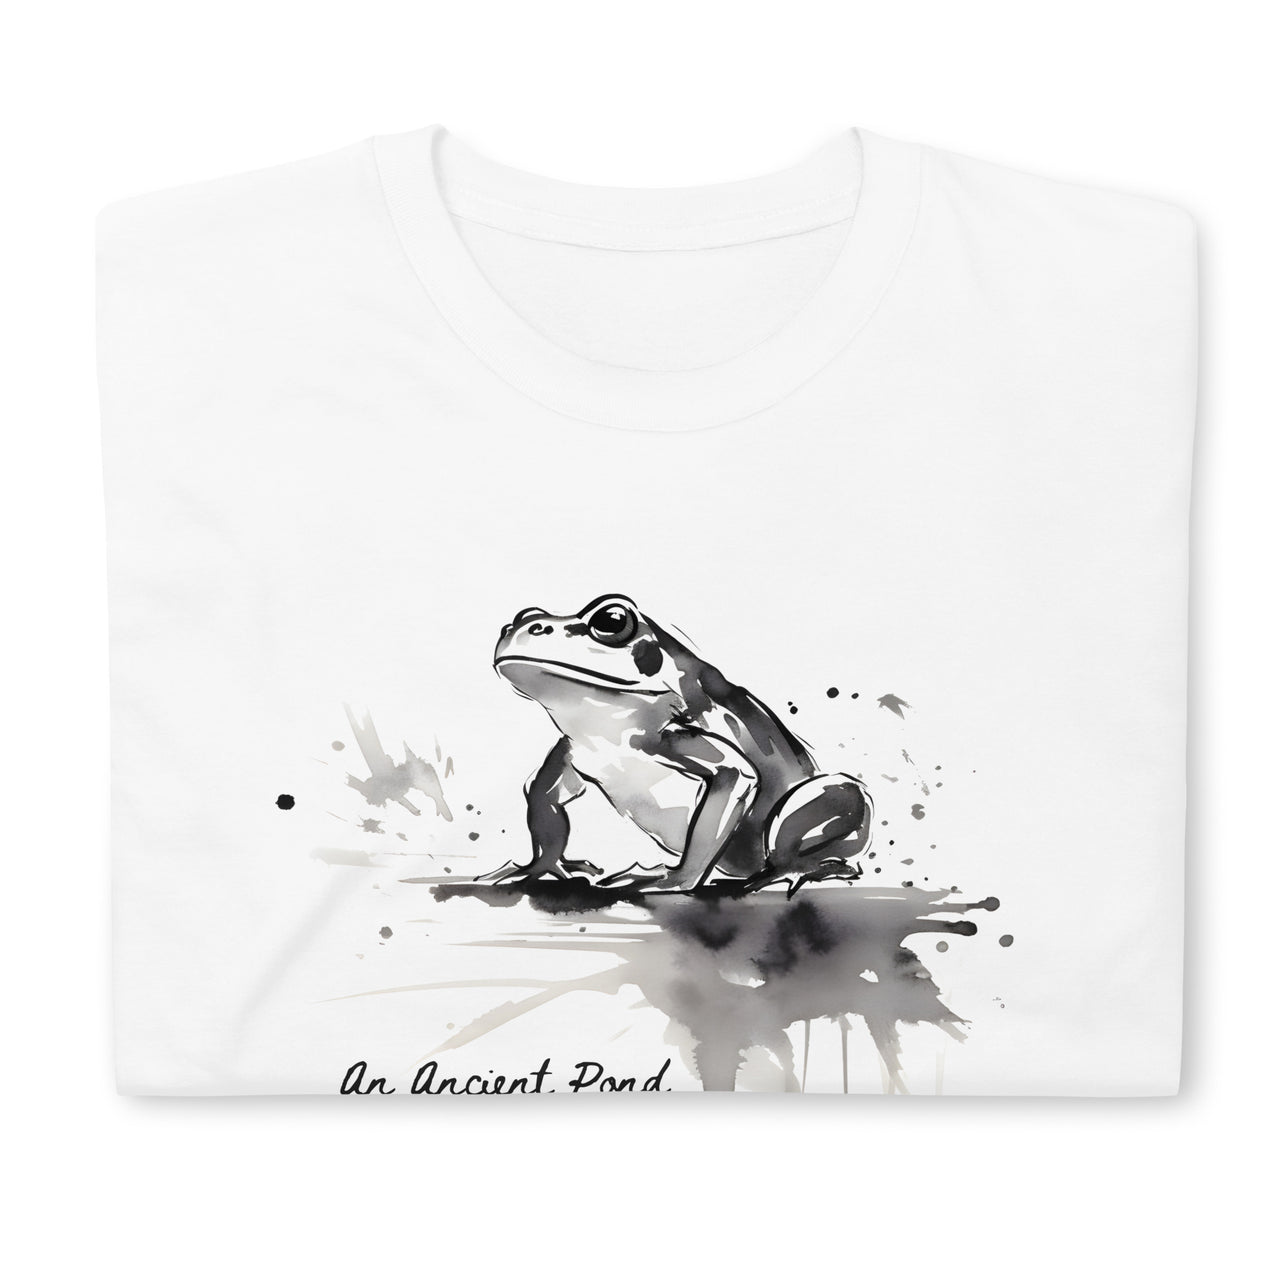 Sumi-e Frog Basho's Poem Sound of Water T-Shirt